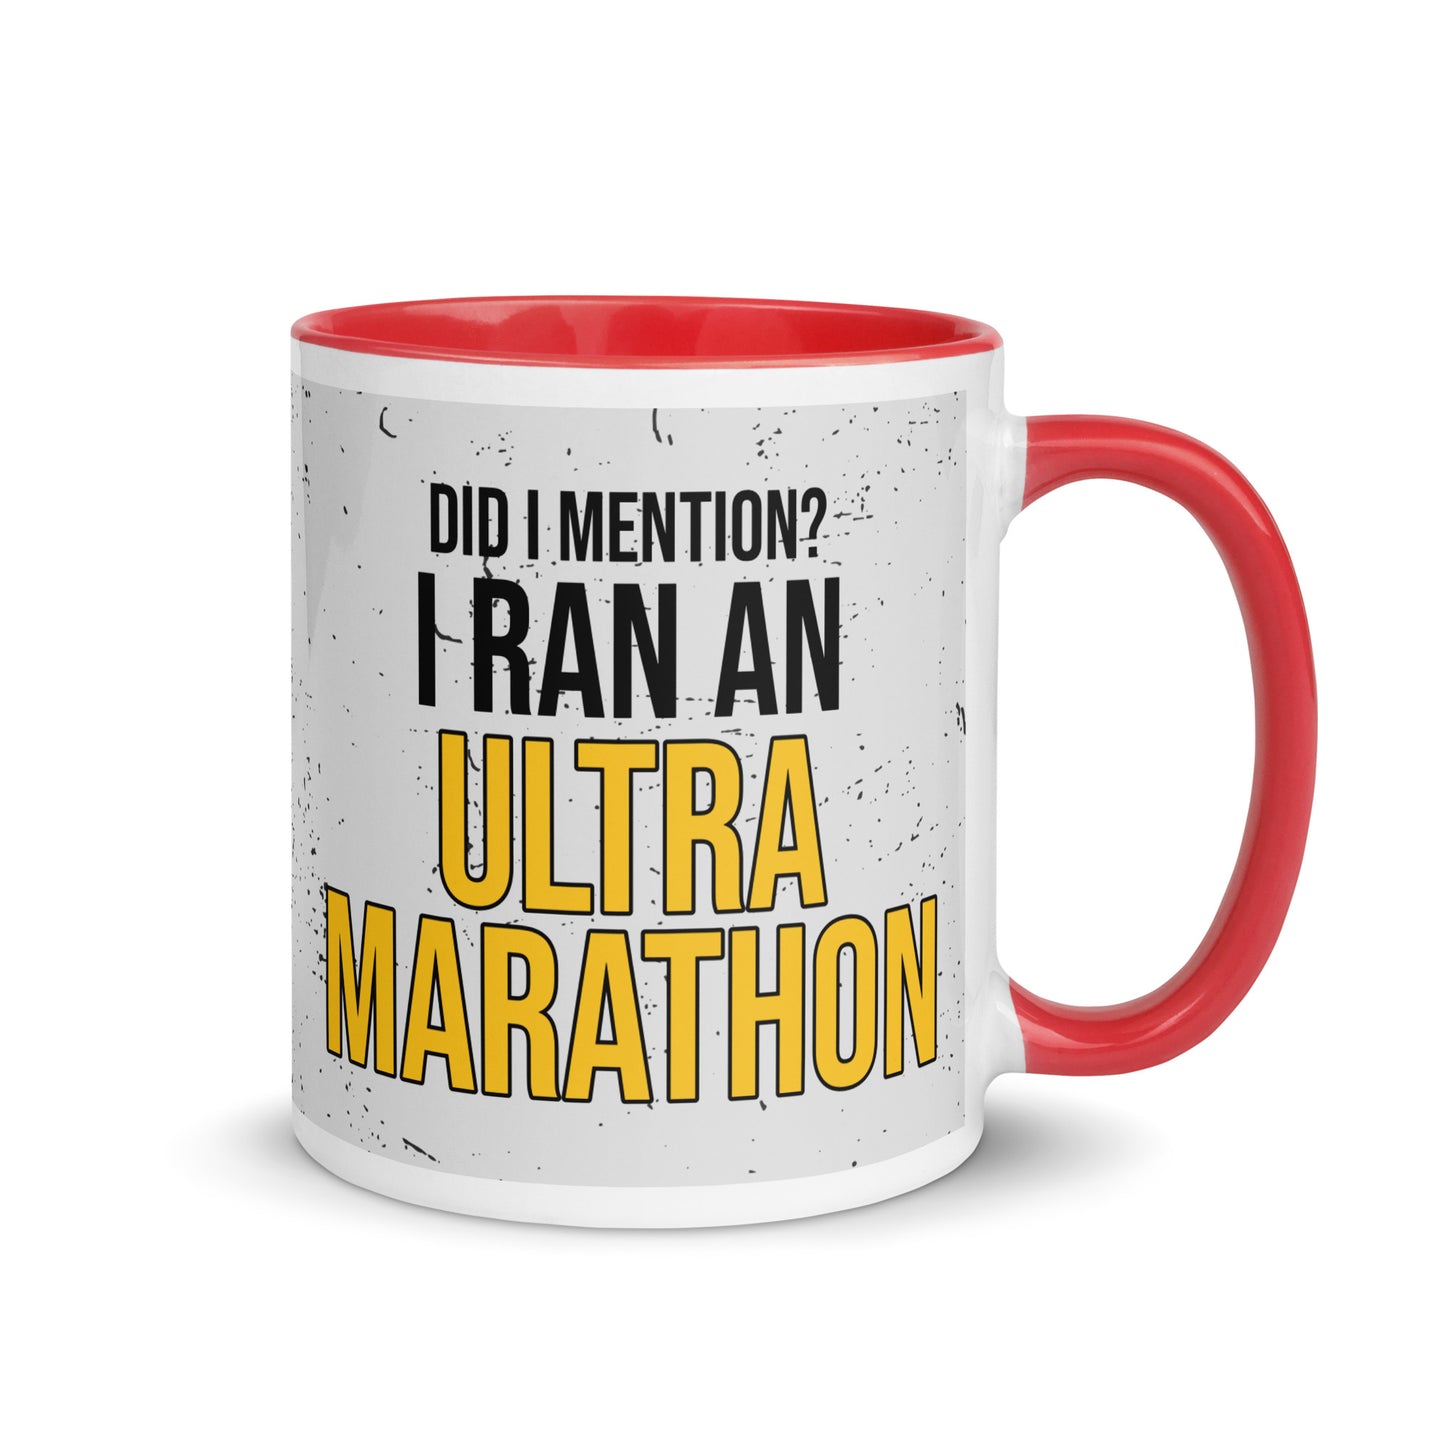 coffee mug with red rim and handle, with a paint splatter design around the mug, and the words Did i mention? i ran an ultra marathon in a bold font. a gift for people who have completed an ultra marathon.  